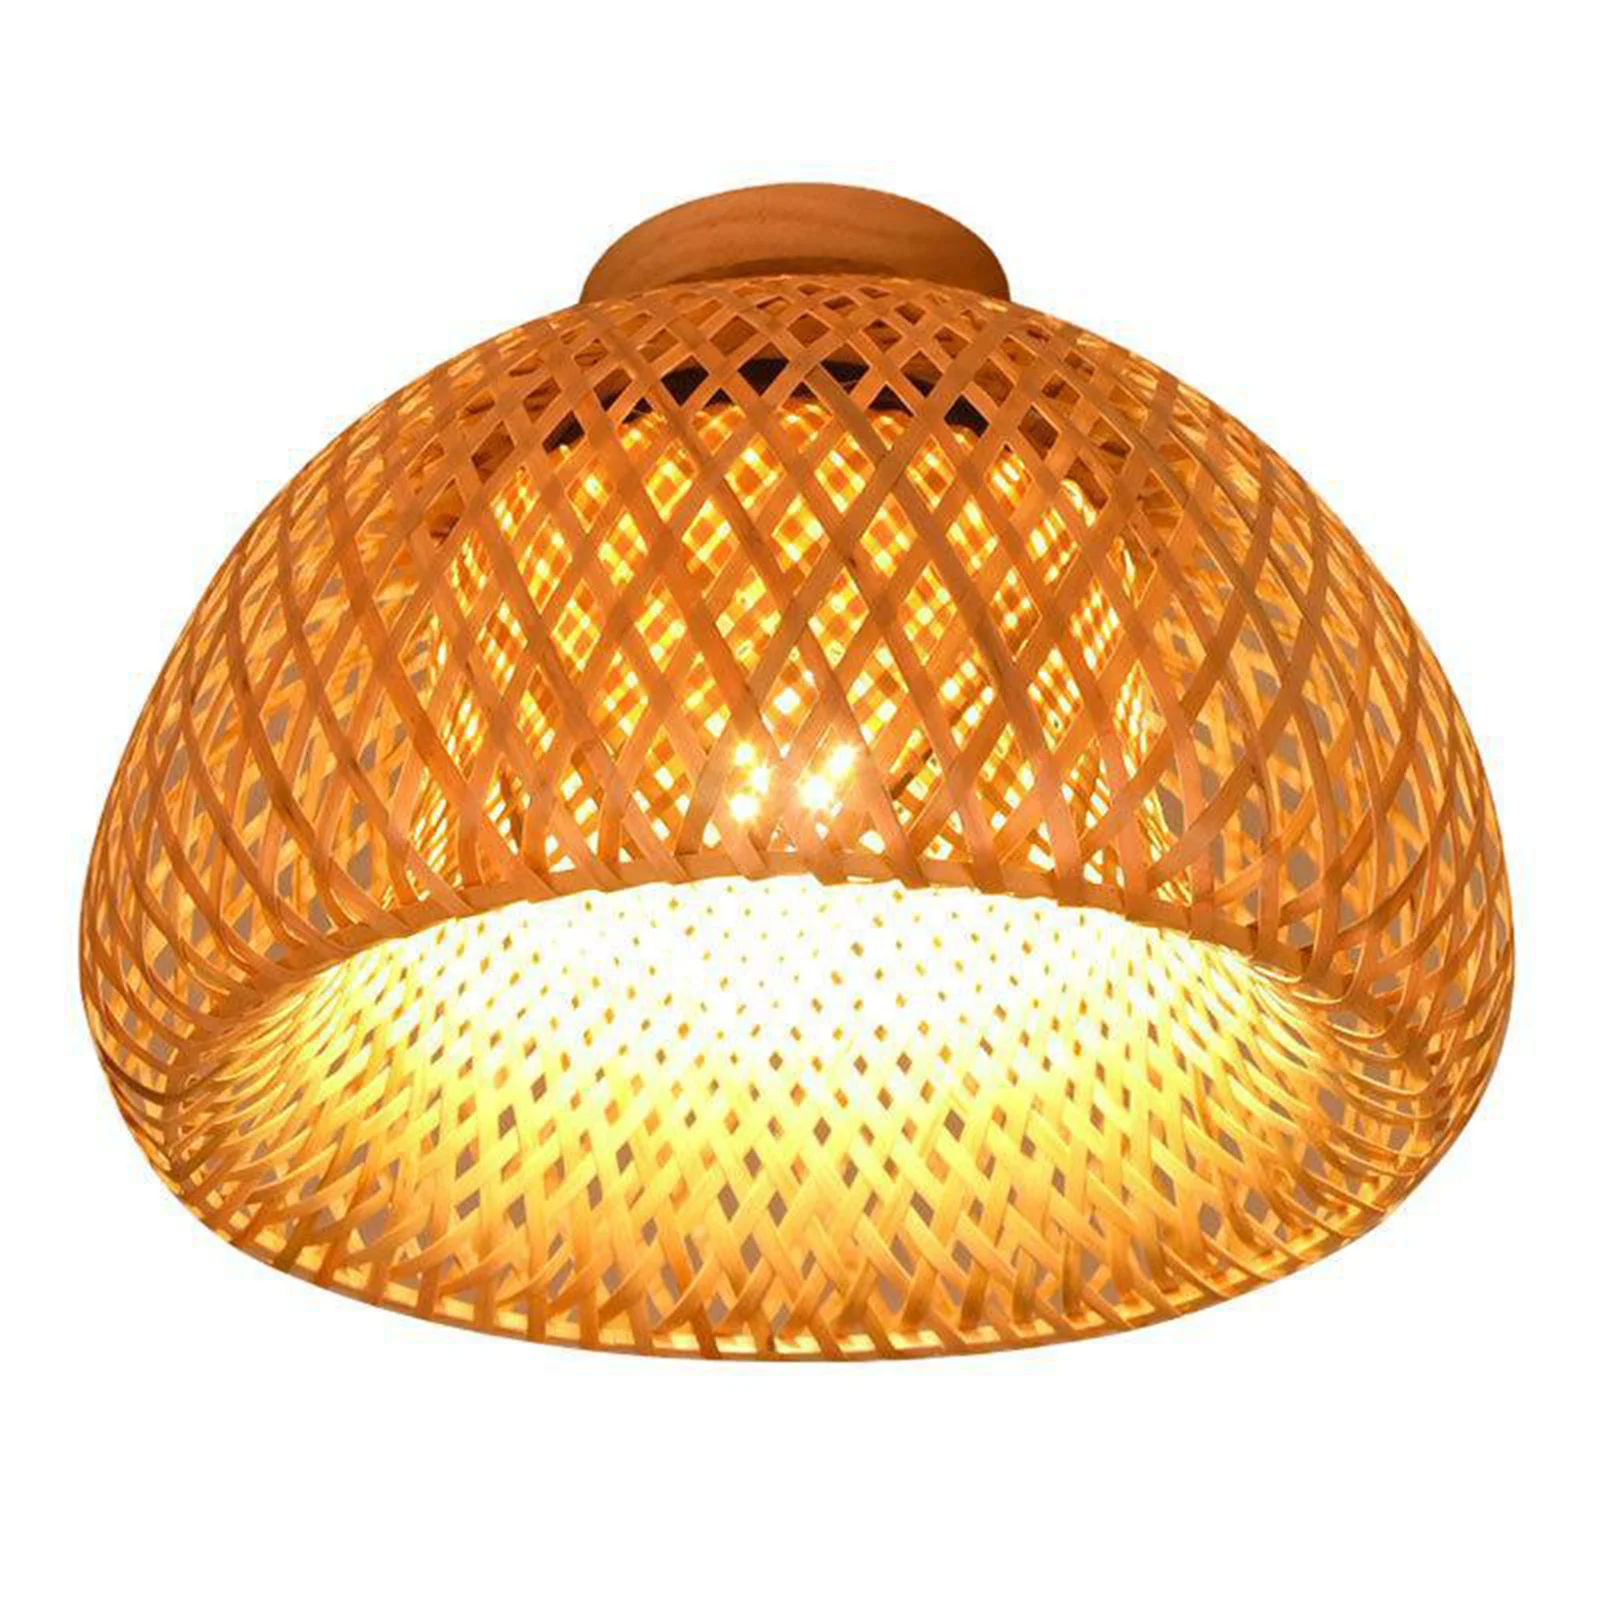 Bamboo Wicker Rattan Ceiling Light Hanging Fixture E27 Base Rustic for Hallway